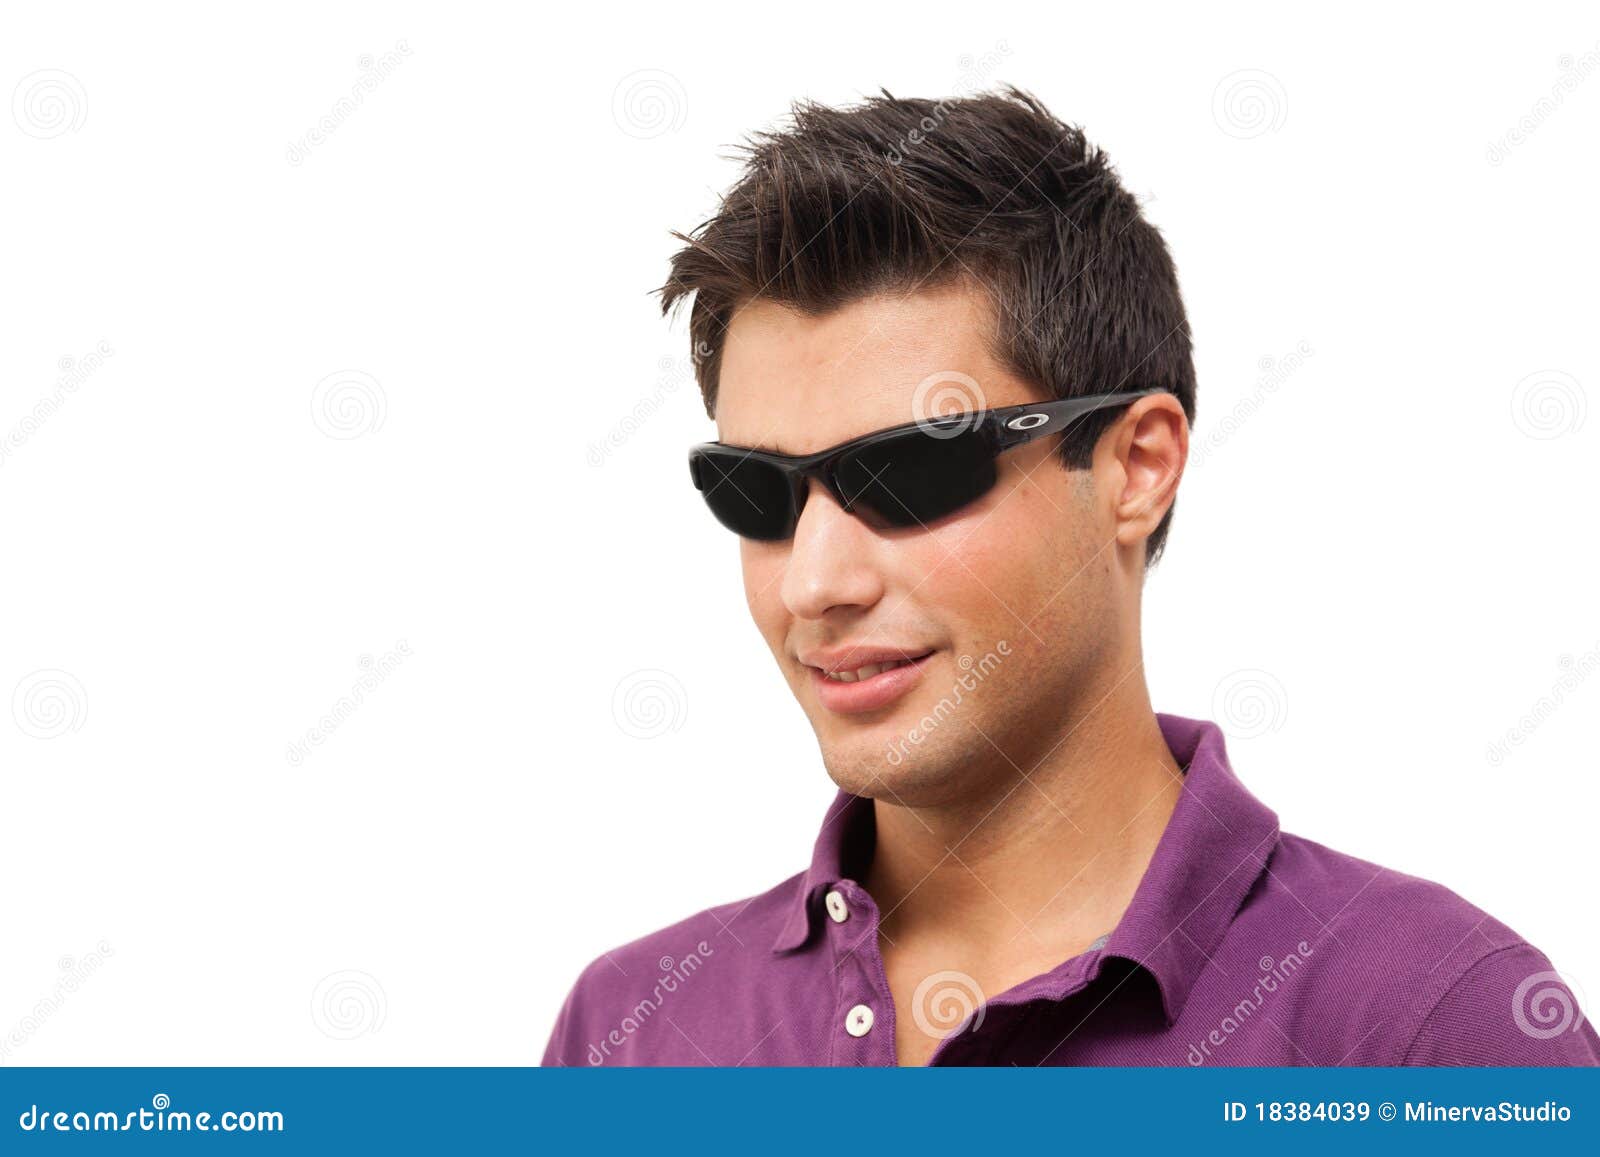 Young Man Wearing Sunglasses Royalty Free Stock Images - Image: 18384039